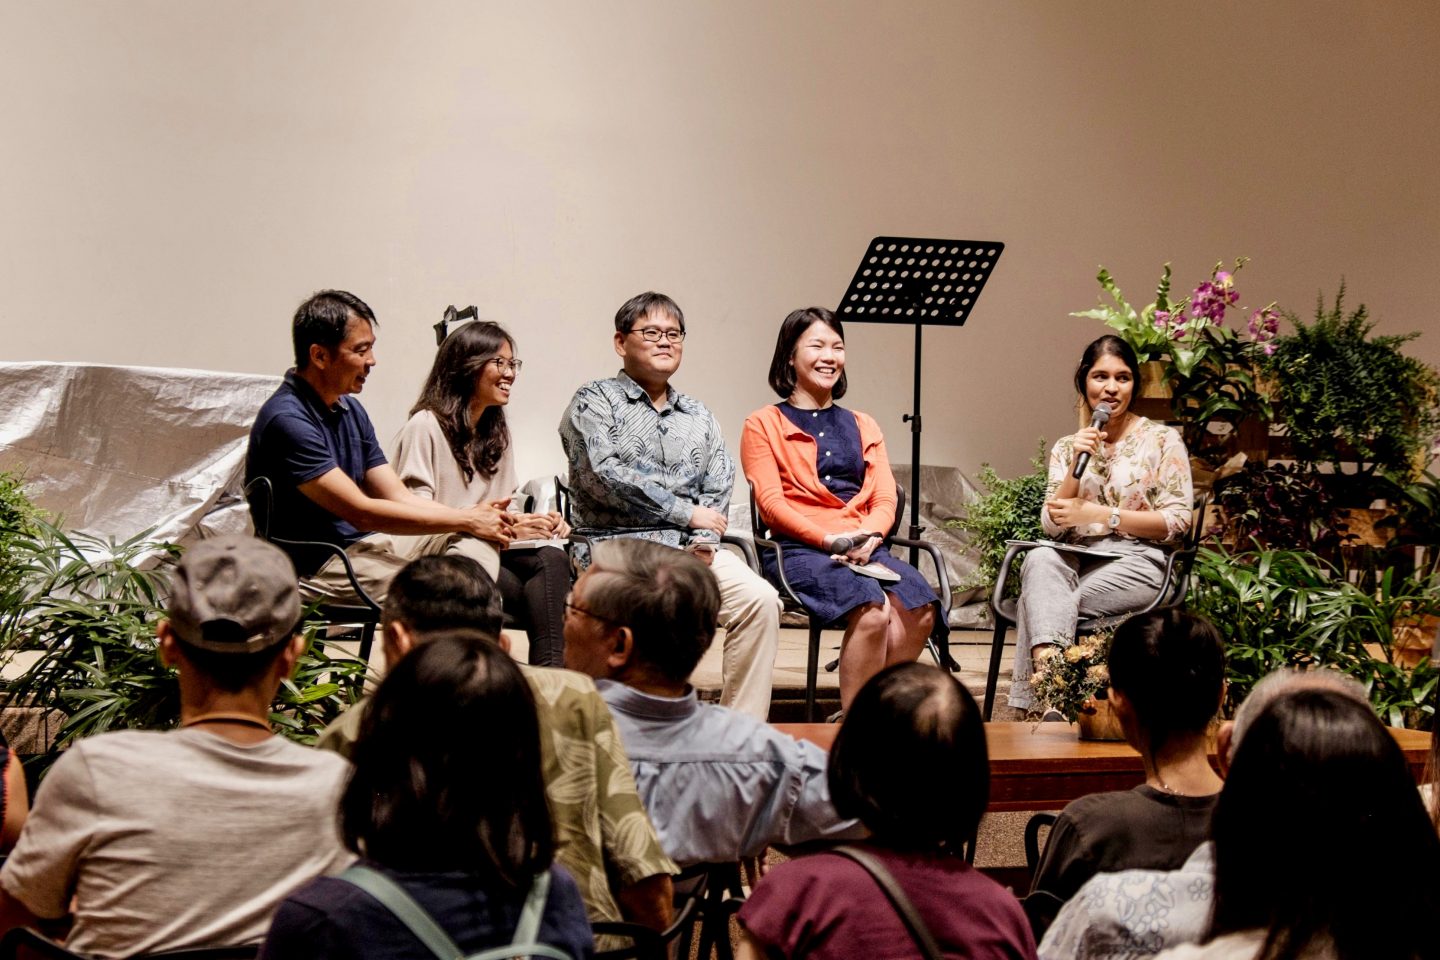 (left to right) Reverend Lam Kuo Yung, Priscilla Teh, Quek Tze-Ming and Hoi Wen Au Yong taking part in a panel discussion moderated by Prarthini Selveindran. Photo courtesy of Graceworks.